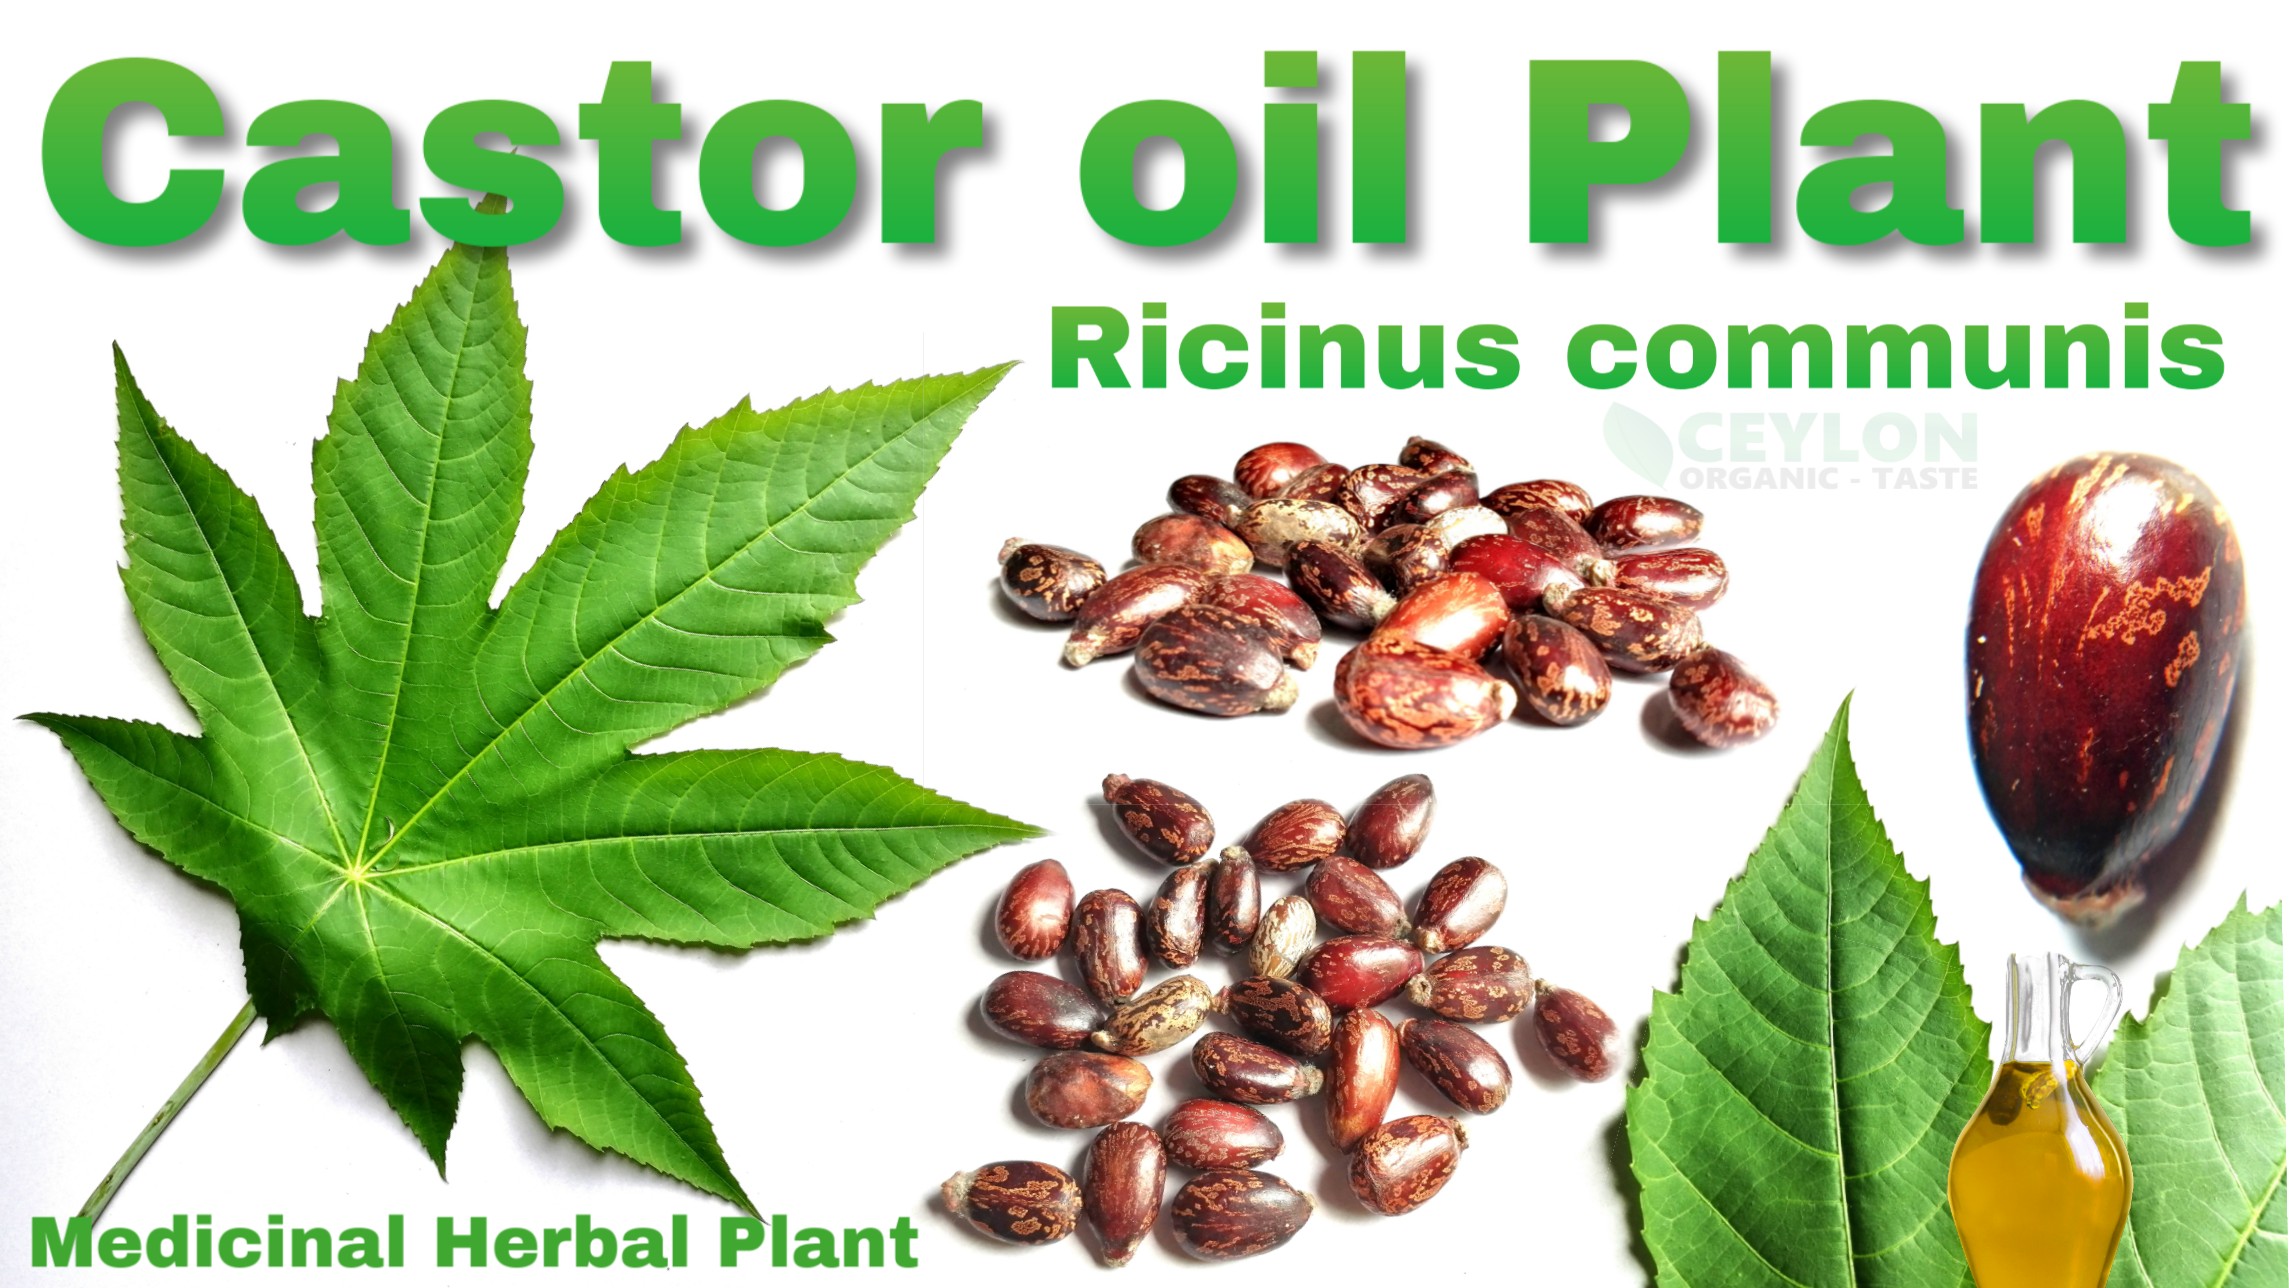 Castor oil Plant – One of the Best Indigenous Herbal for many ailments